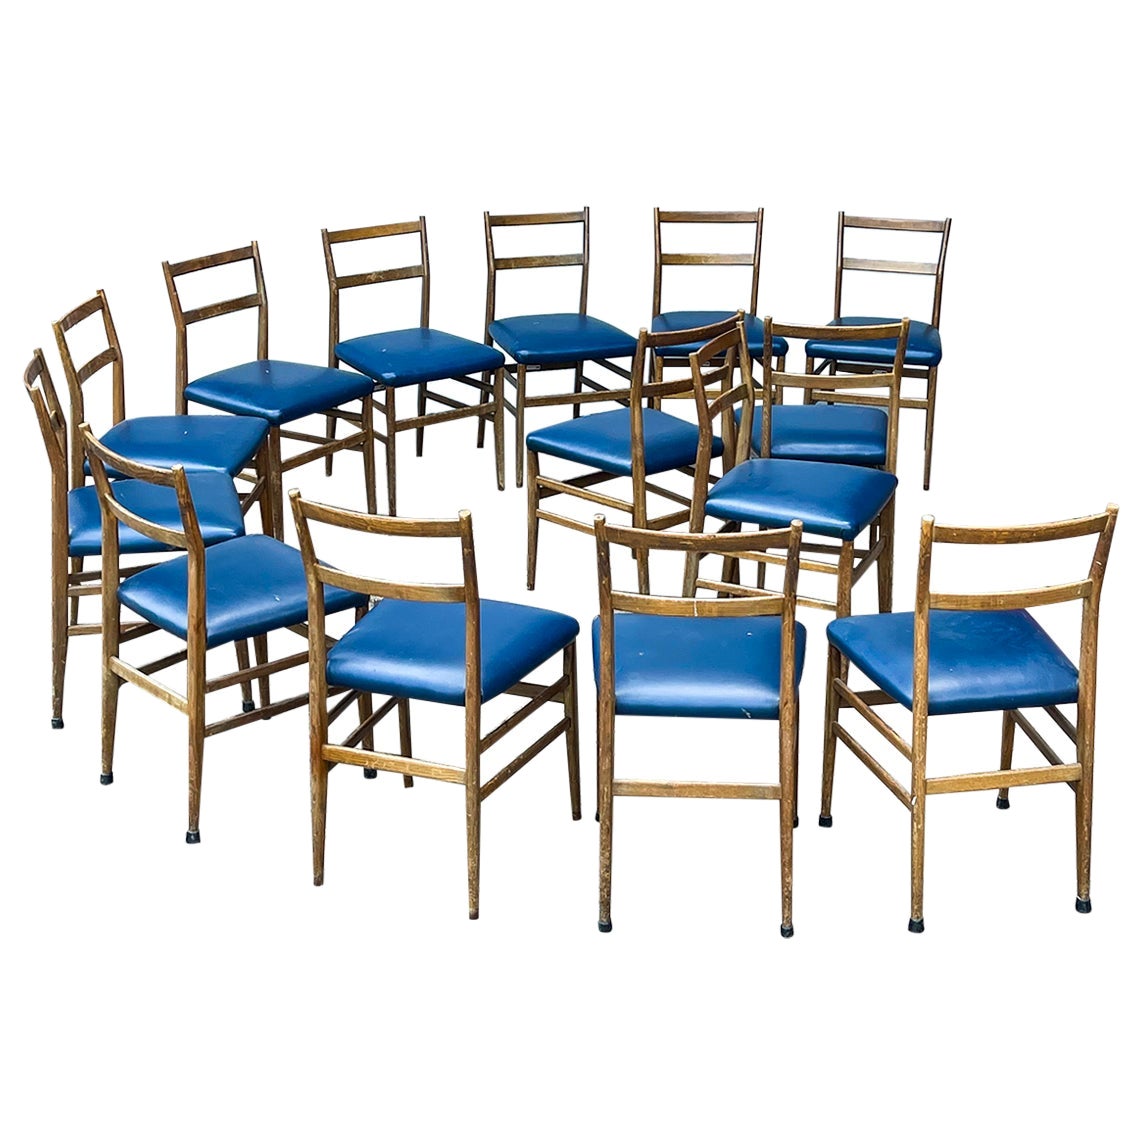 14 Gio Ponti Dining Chairs, Wood And Blue Leather, Italian Collectible Furniture For Sale